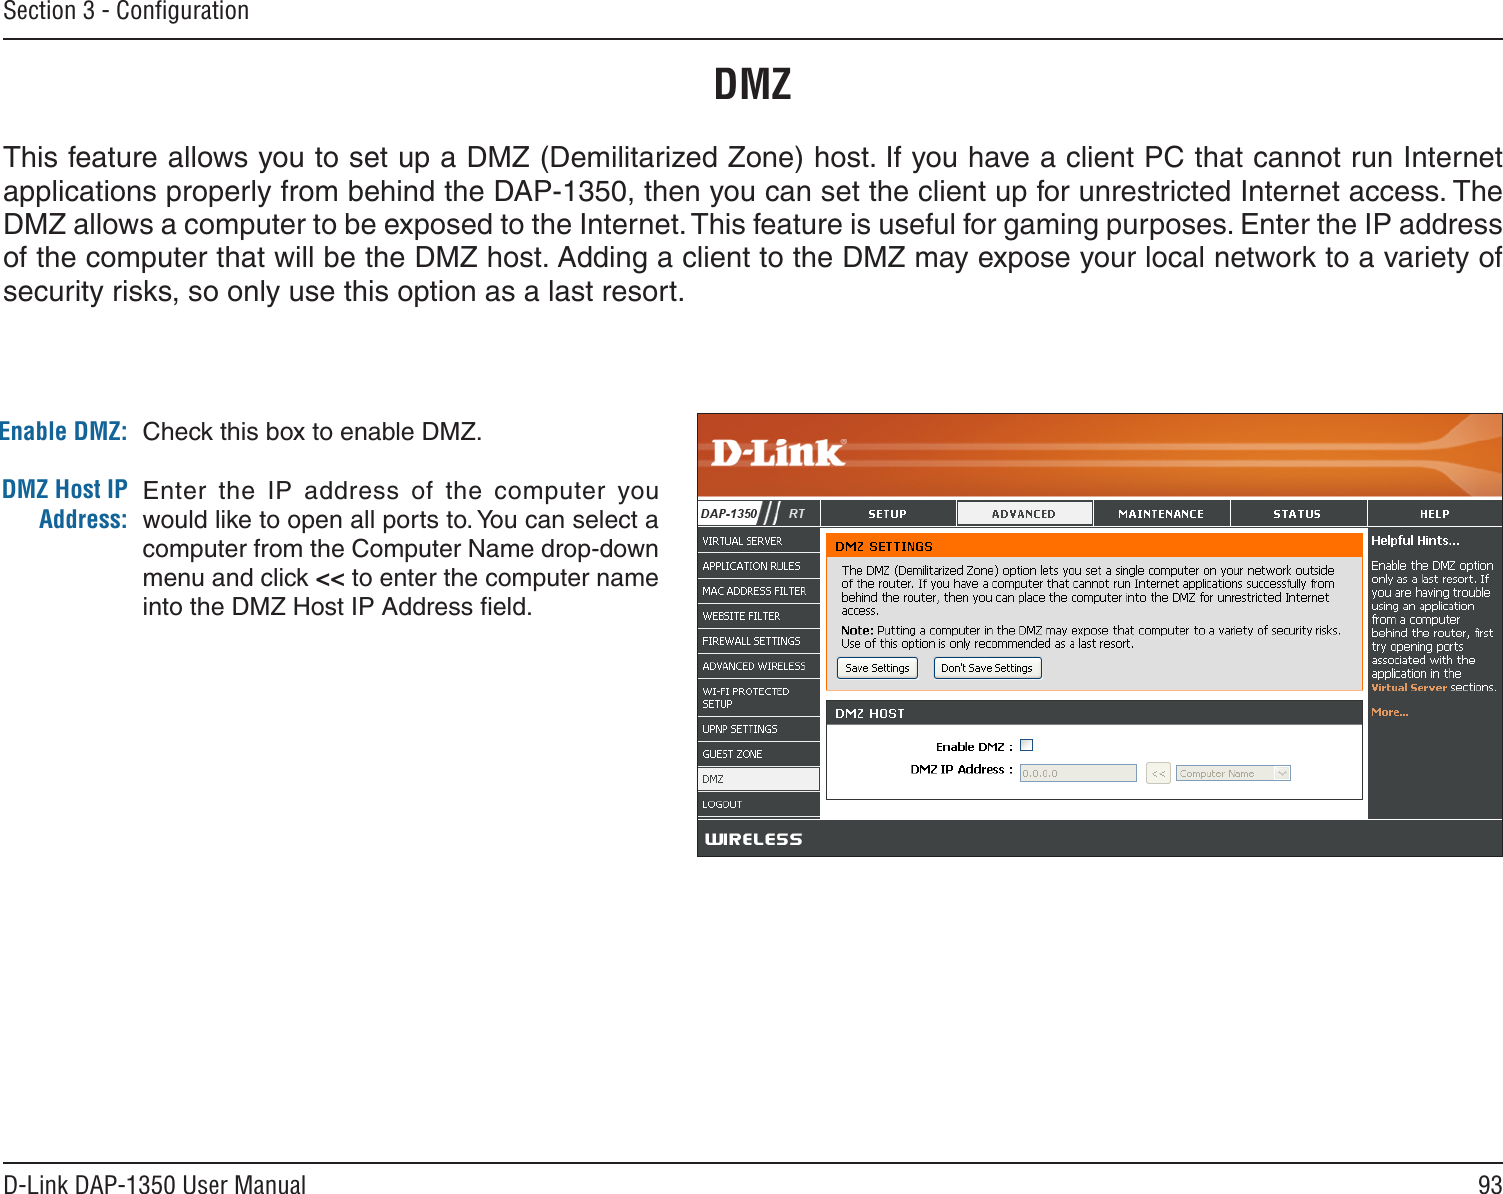 93D-Link DAP-1350 User ManualSection 3 - ConﬁgurationDMZCheck this box to enable DMZ.Enter  the  IP  address  of  the  computer  you would like to open all ports to. You can select a computer from the Computer Name drop-down menu and click &lt;&lt; to enter the computer name into the DMZ Host IP Address ﬁeld.Enable DMZ:DMZ Host IP Address:This feature allows you to set up a DMZ (Demilitarized Zone) host. If you have a client PC that cannot run Internet applications properly from behind the DAP-1350, then you can set the client up for unrestricted Internet access. The DMZ allows a computer to be exposed to the Internet. This feature is useful for gaming purposes. Enter the IP address of the computer that will be the DMZ host. Adding a client to the DMZ may expose your local network to a variety of security risks, so only use this option as a last resort.